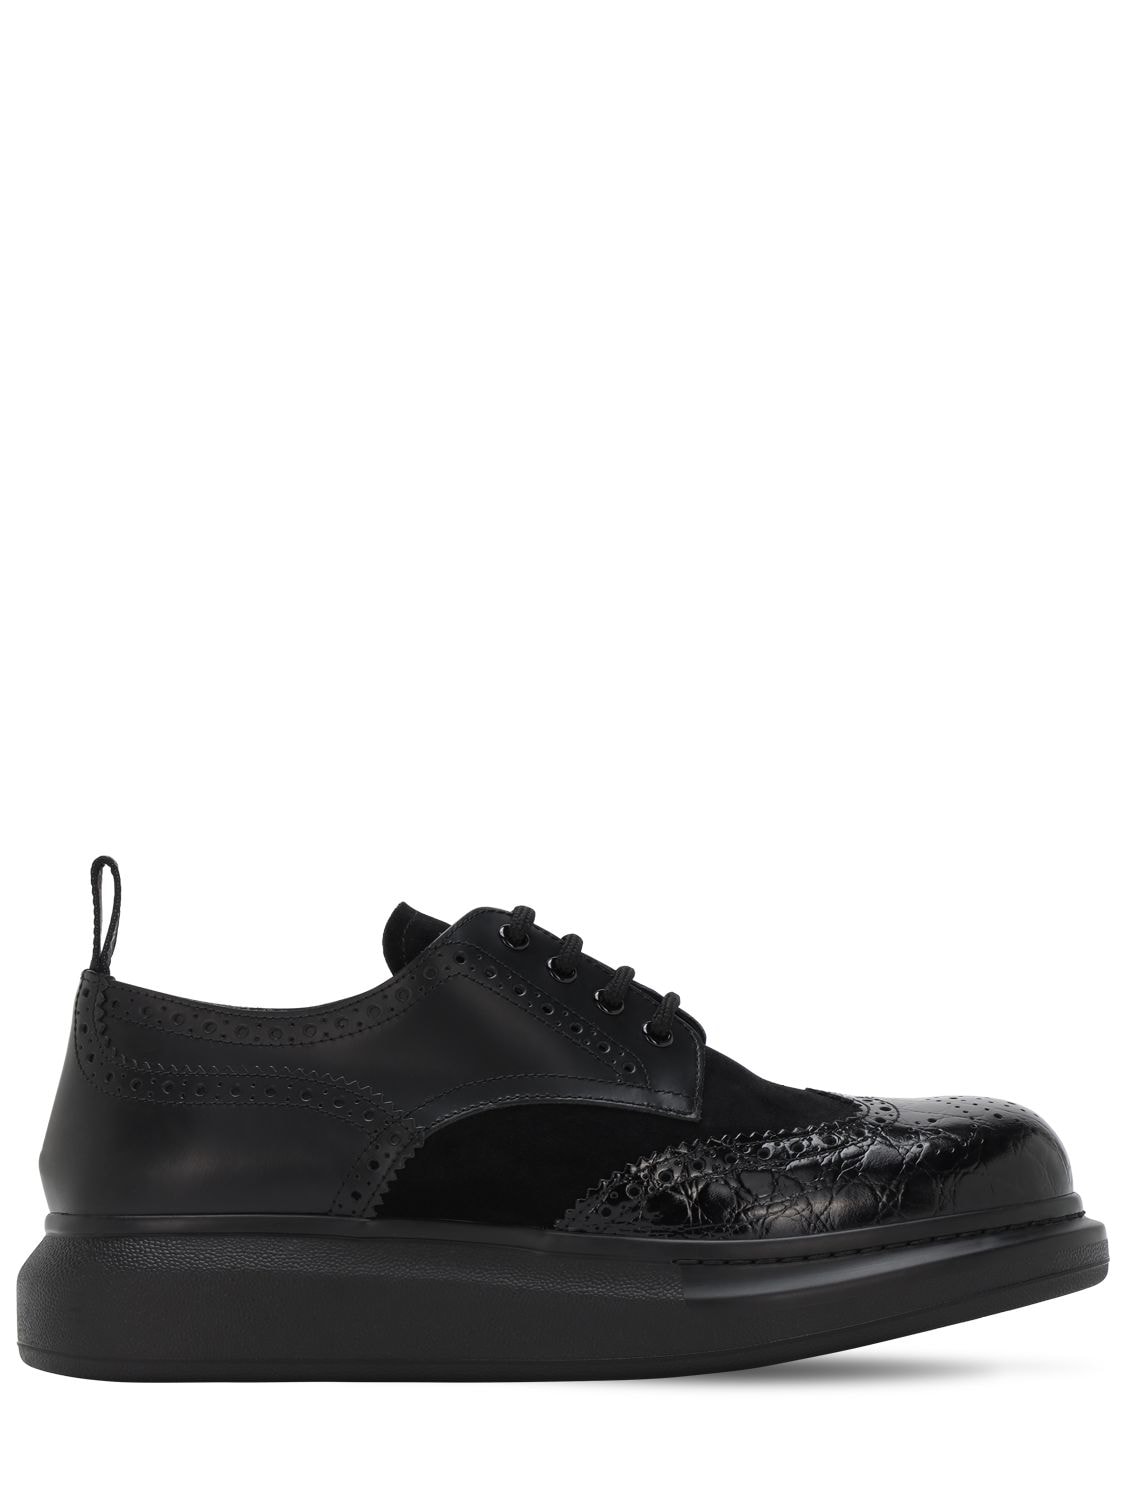 ALEXANDER MCQUEEN BROGUE LEATHER LACE-UP SHOES,72IA9U014-MTAWMA2